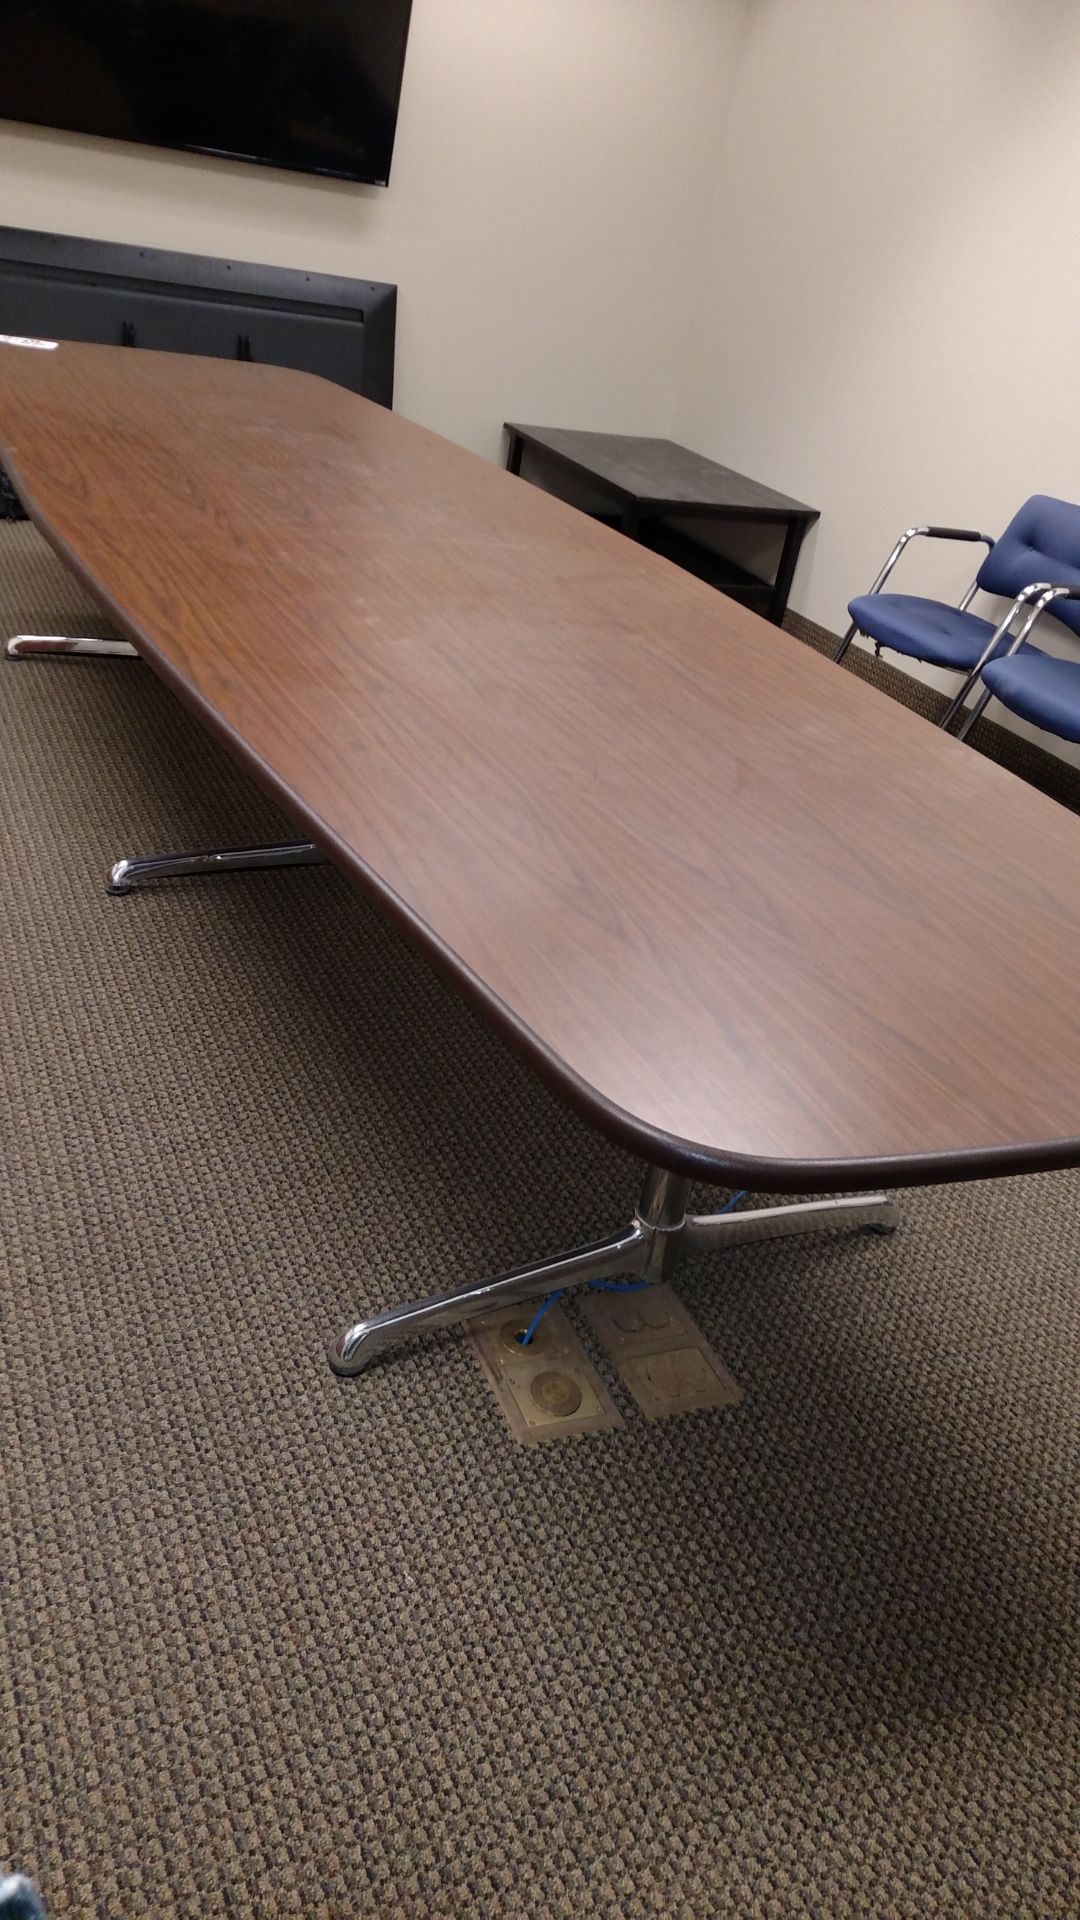 CONFERENCE TABLE, 4' X 12' (CHAIRS NOT INCLUDED)